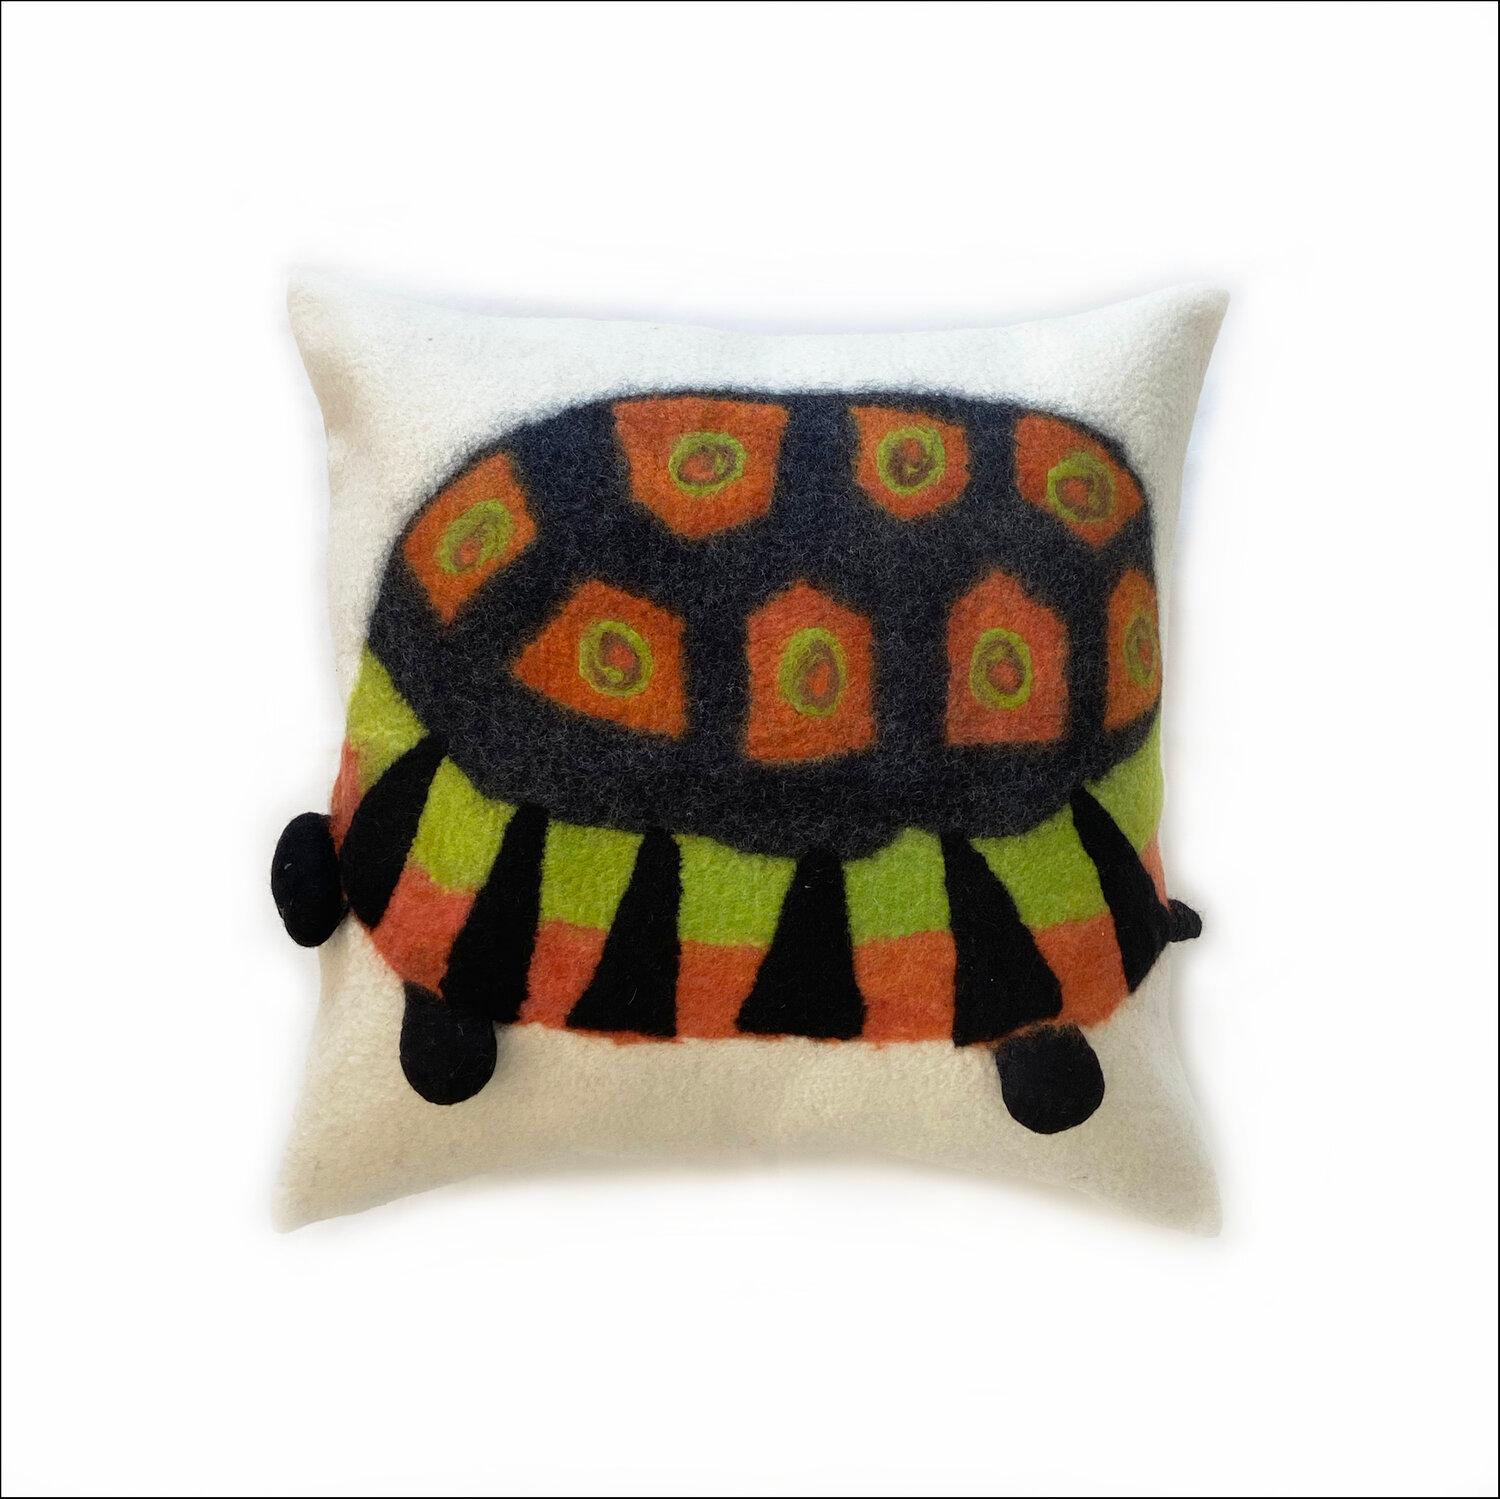 Modern Contemporary Handmade Wool Pillows with Playful Turtle Image